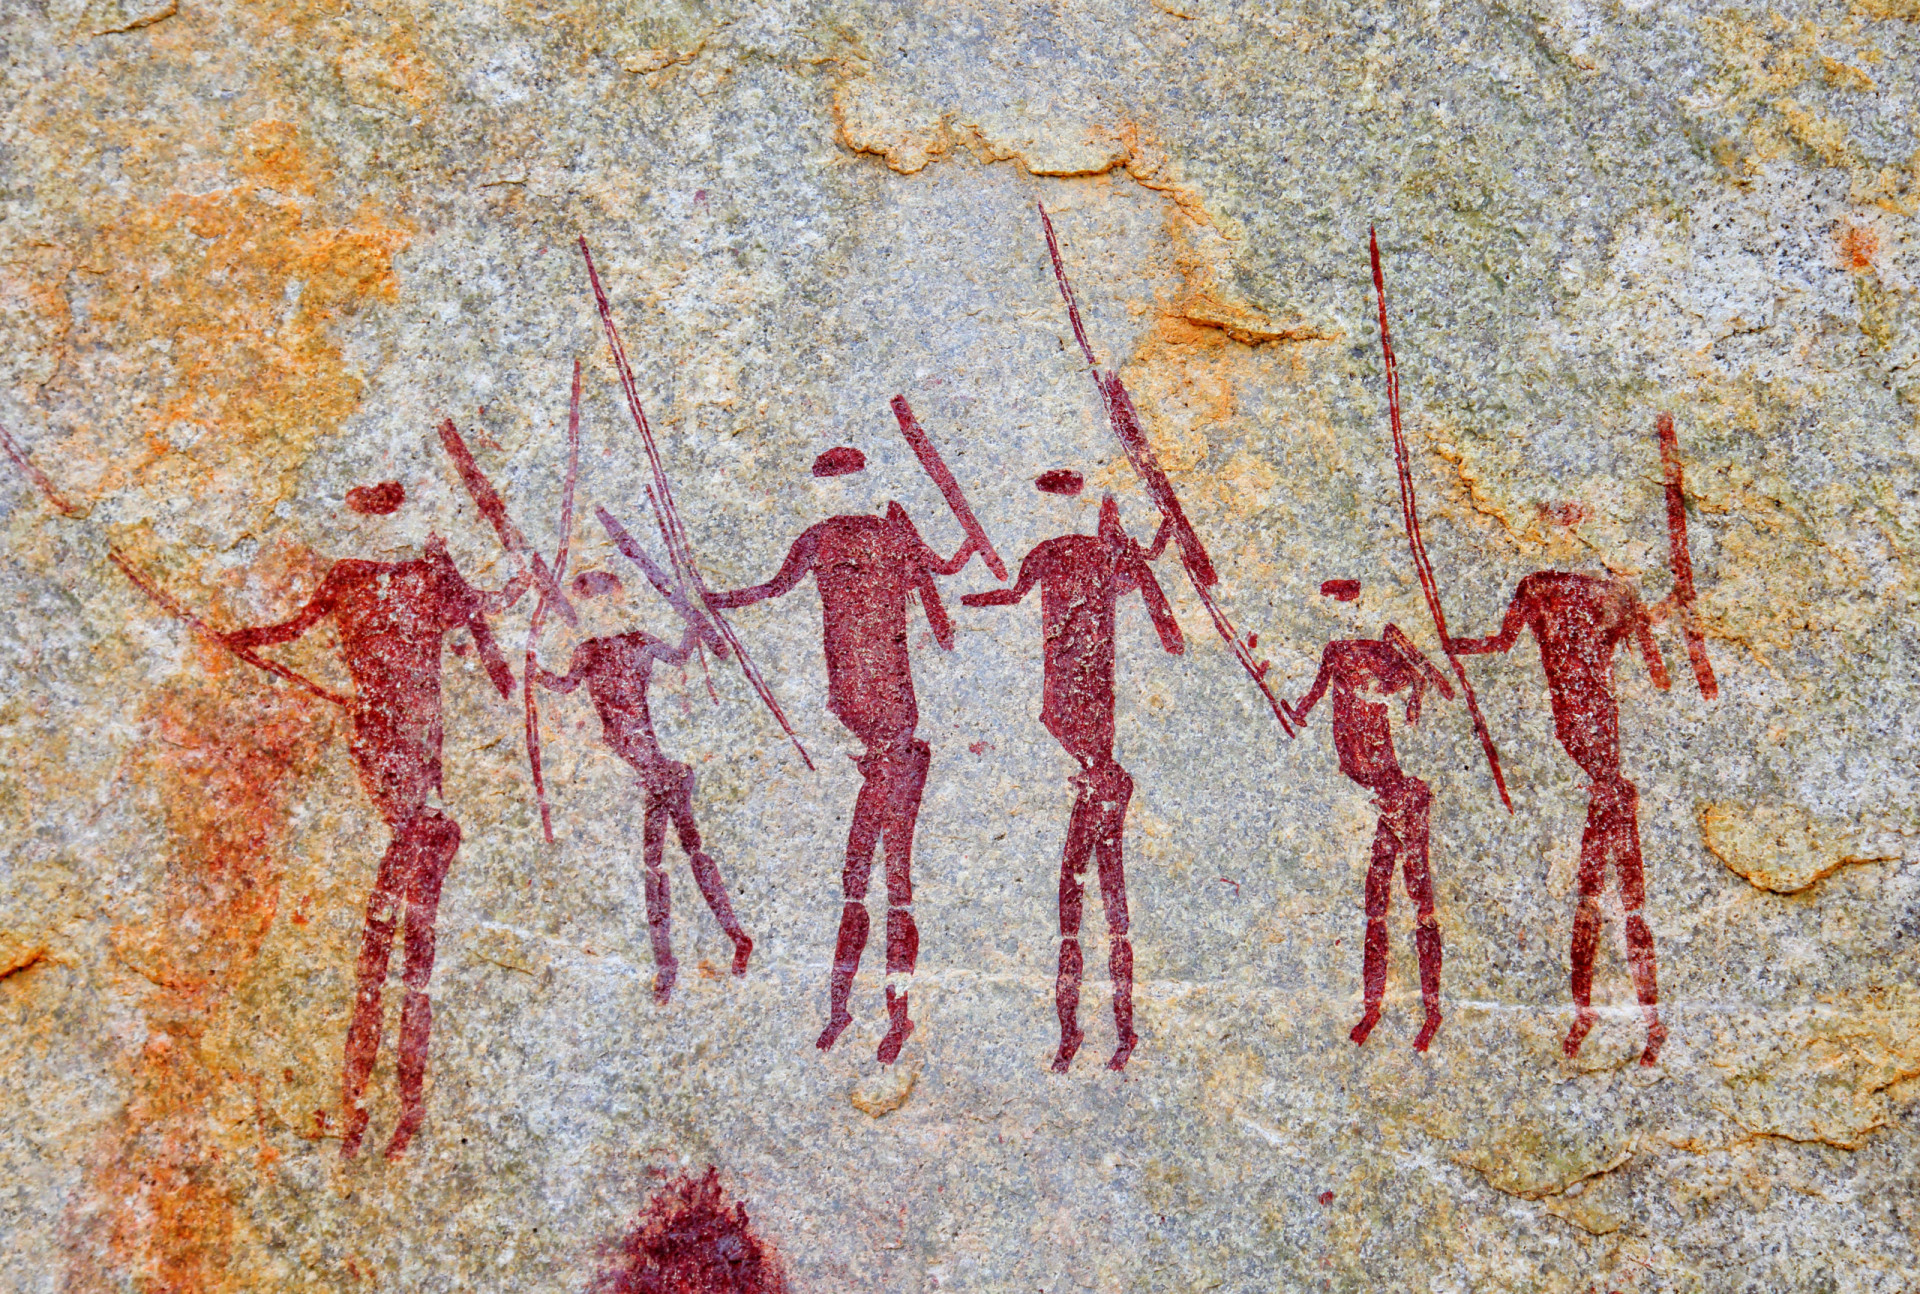 <p>Also known as the Bushmen, the San are among the oldest inhabitants of Southern Africa, and they are known for their rock art and unique languages characterized by click consonants.</p><p><a href="https://www.msn.com/en-us/community/channel/vid-7xx8mnucu55yw63we9va2gwr7uihbxwc68fxqp25x6tg4ftibpra?cvid=94631541bc0f4f89bfd59158d696ad7e">Follow us and access great exclusive content every day</a></p>